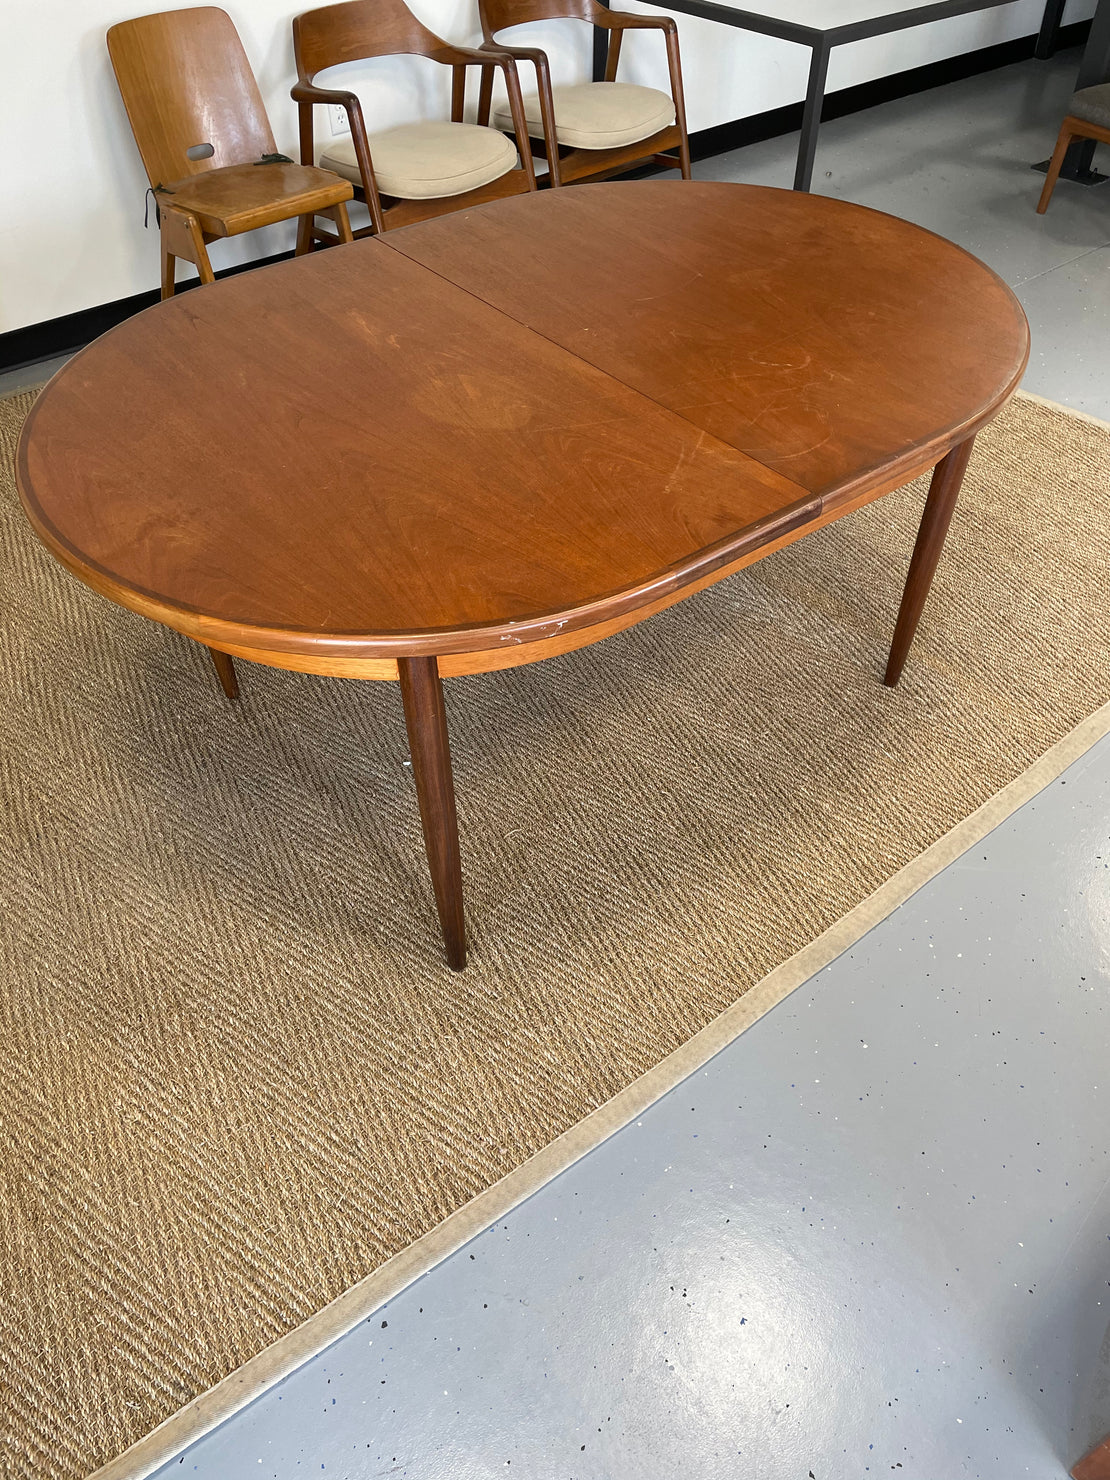 Warehouse Sale A40 - Dining Room Table